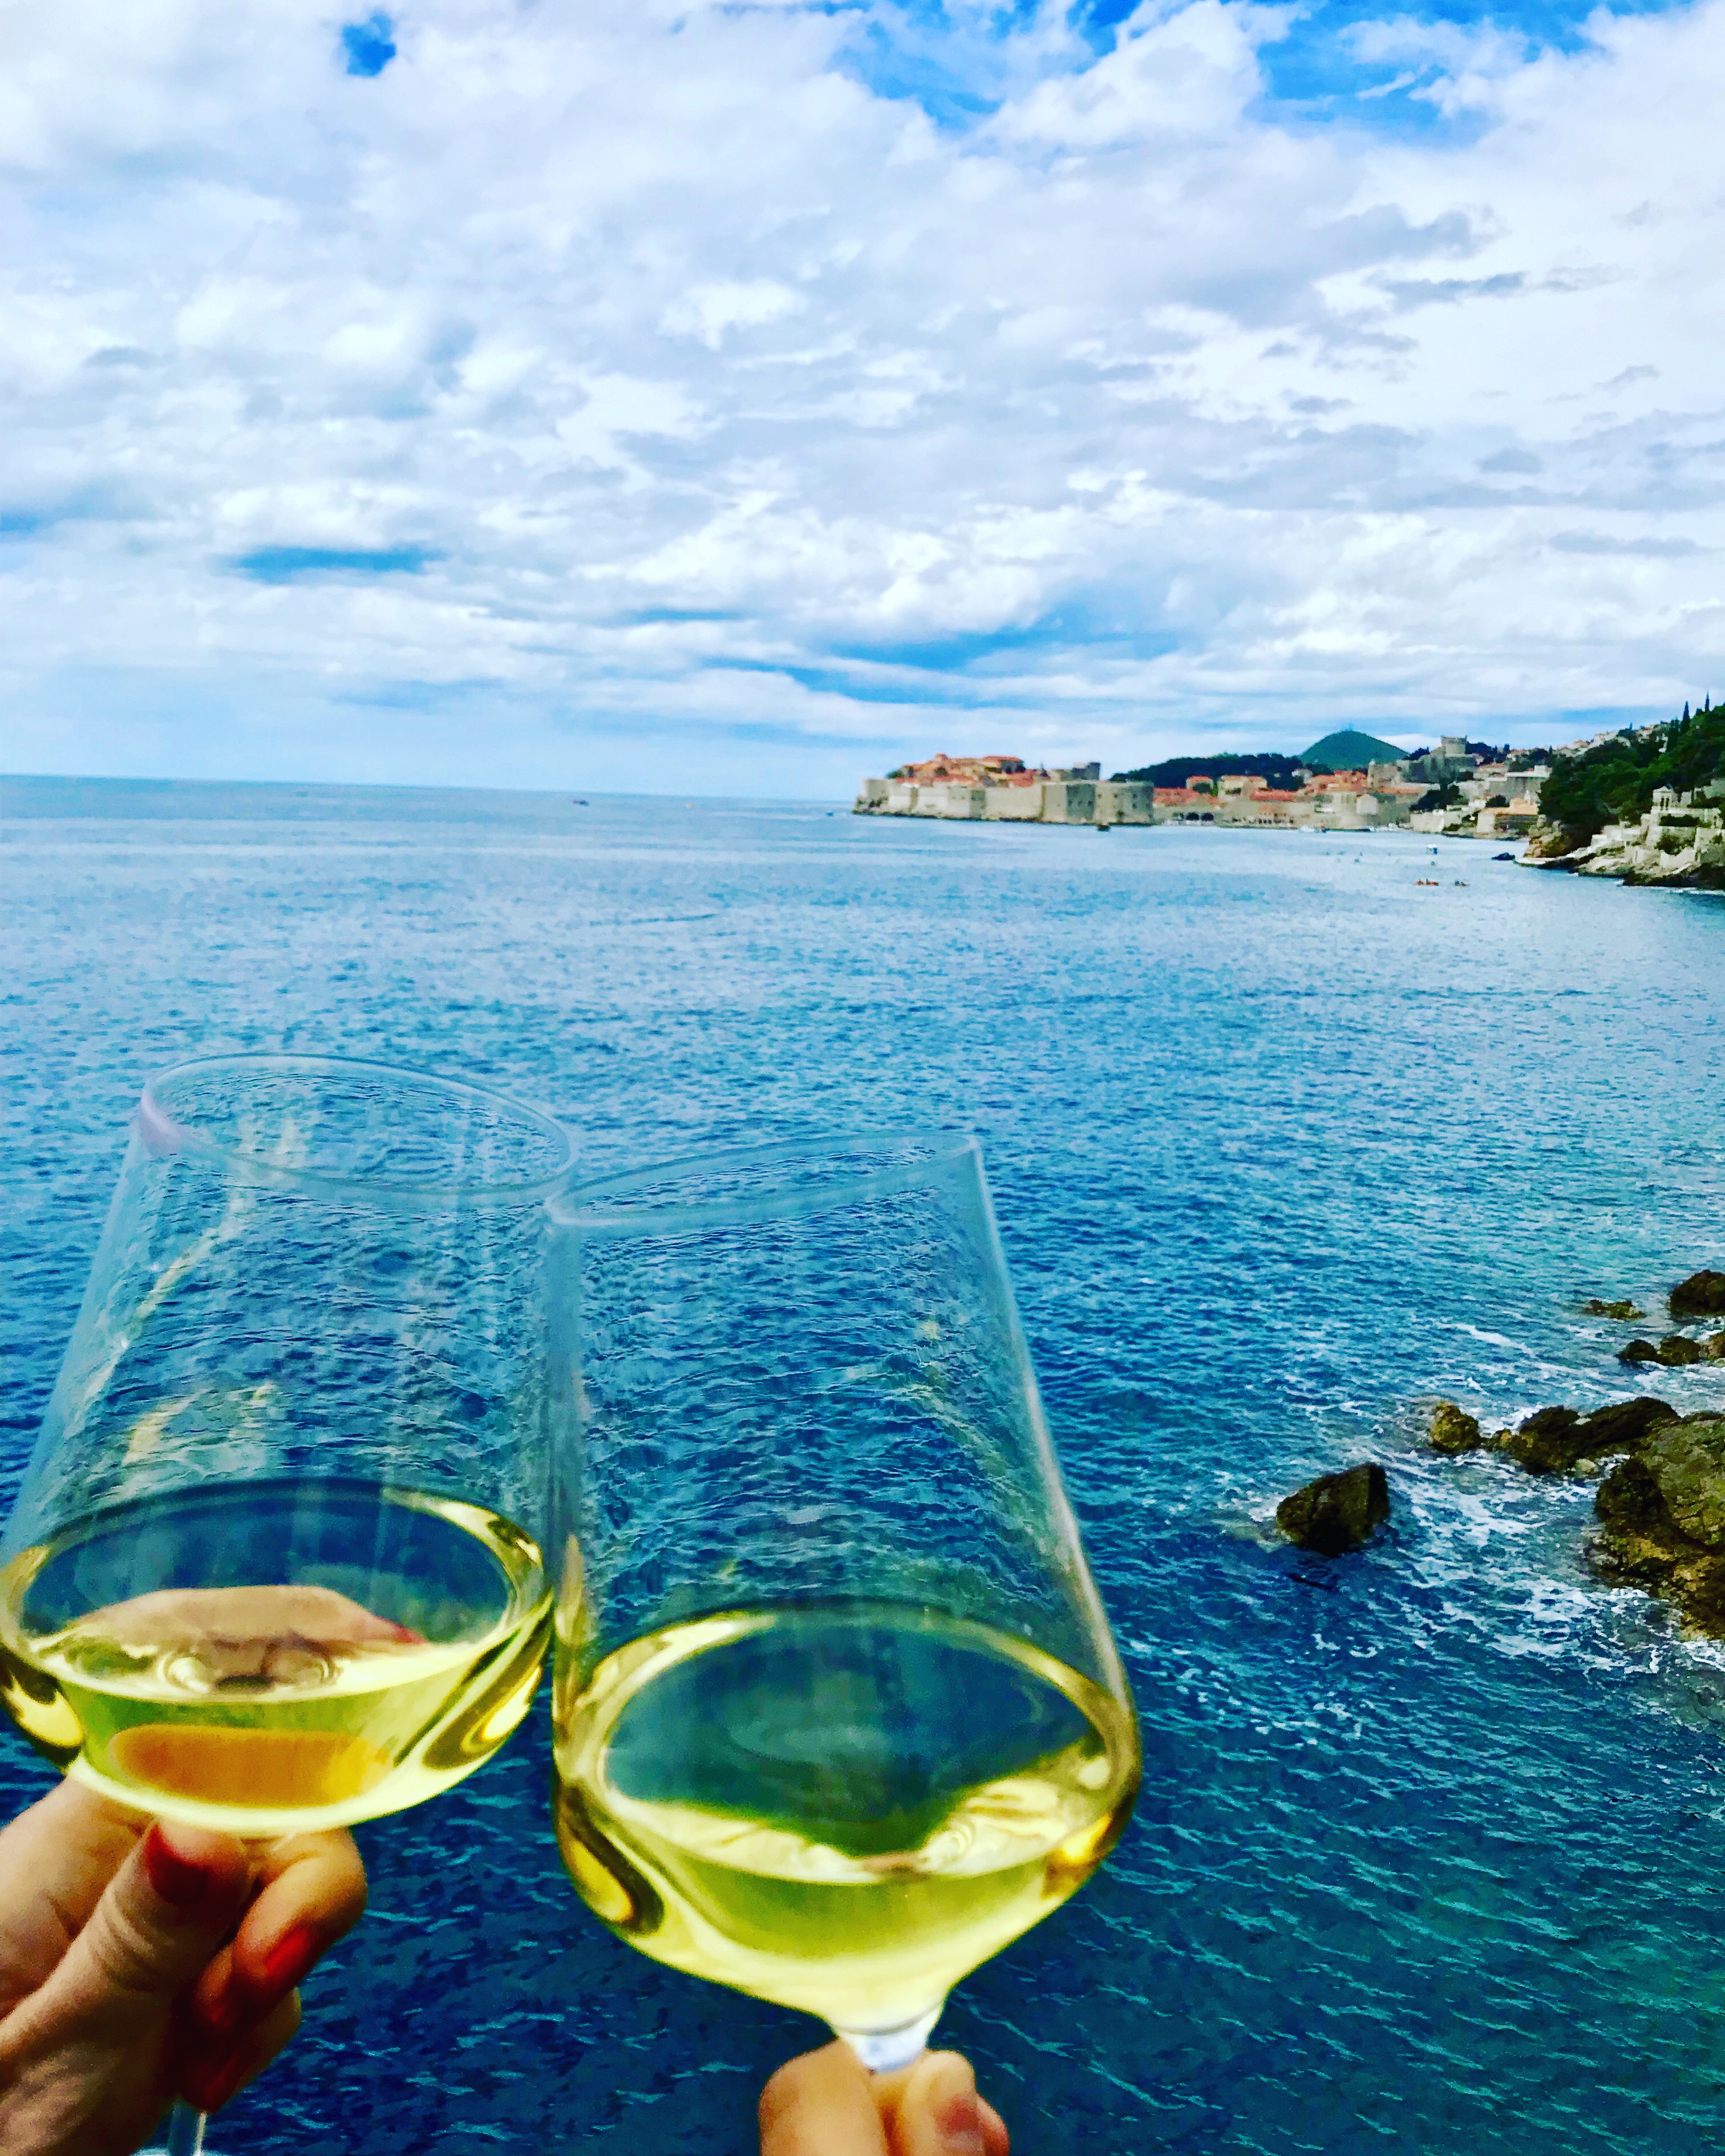 Tracy Dunn and Morgan Dunn enjoying their view from Villa Dubrovnik, and glass of wine, and a delicious lunch on the outside terrace.